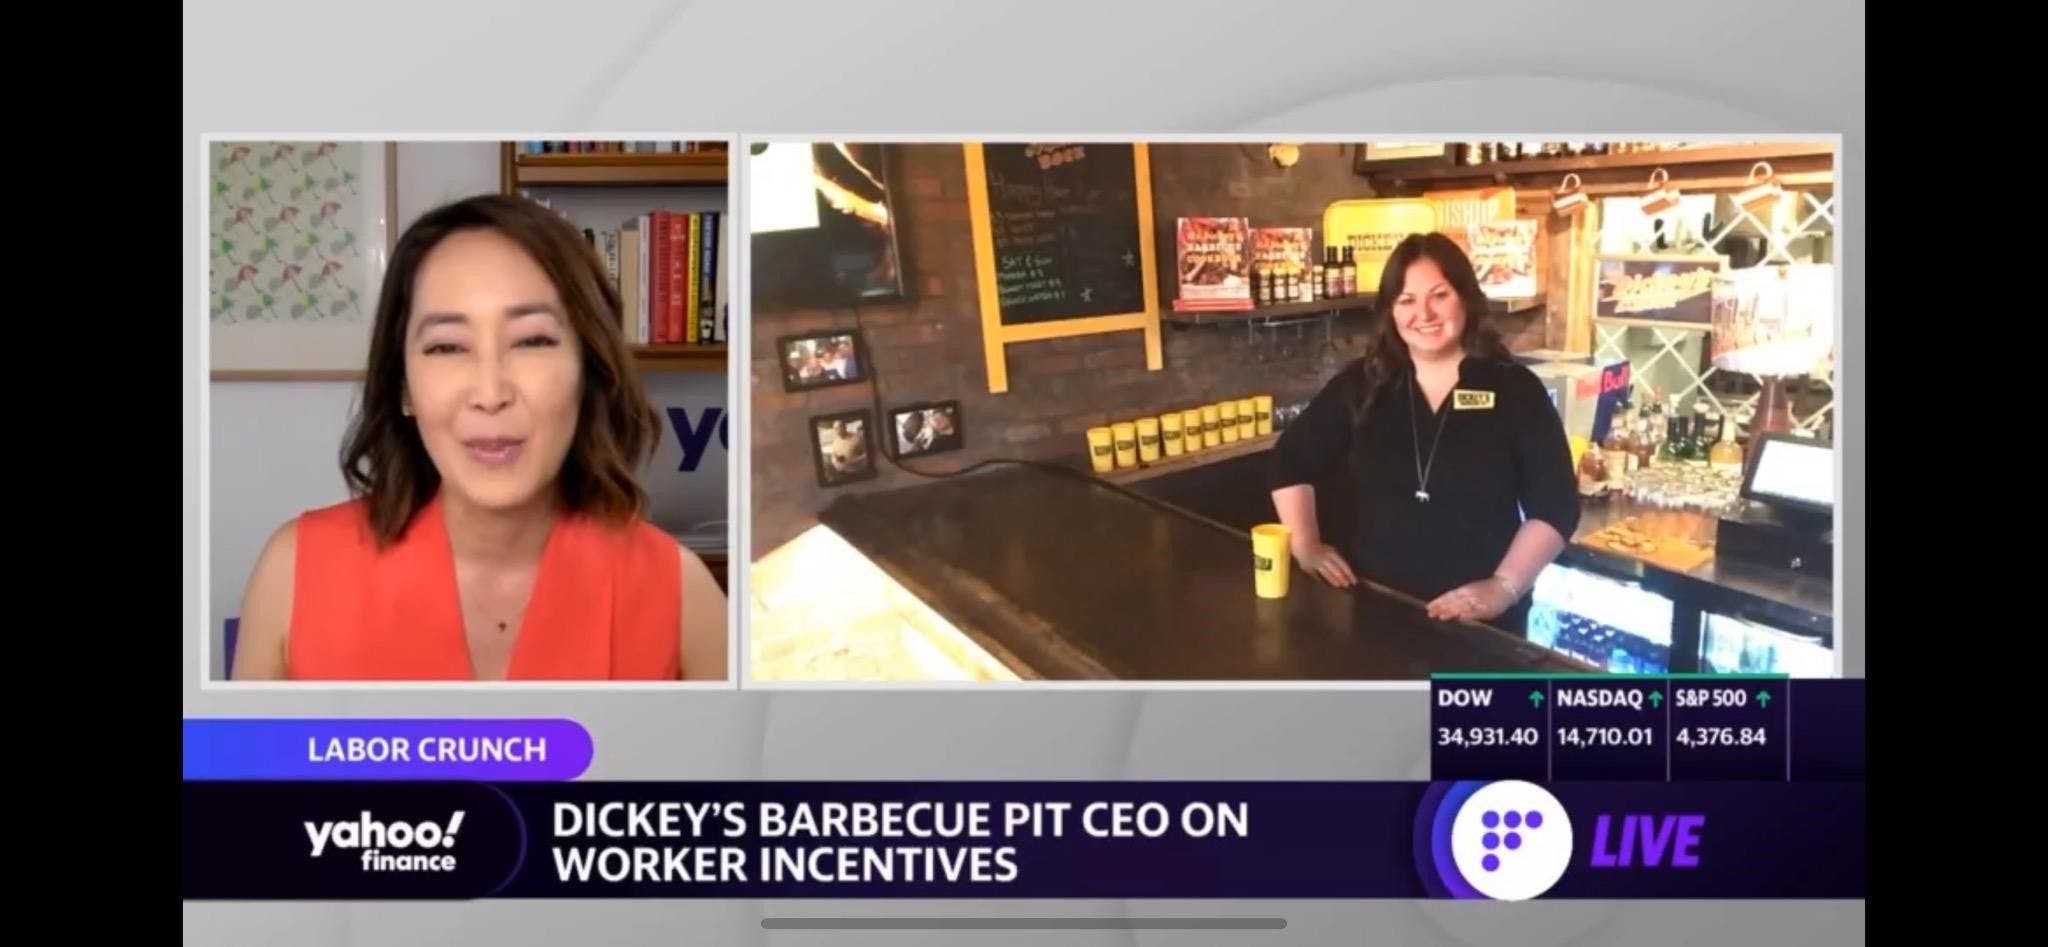 Labor Shortage Putting an 'incredible strain' on Business: Dickey's Barbecue Pit CEO 